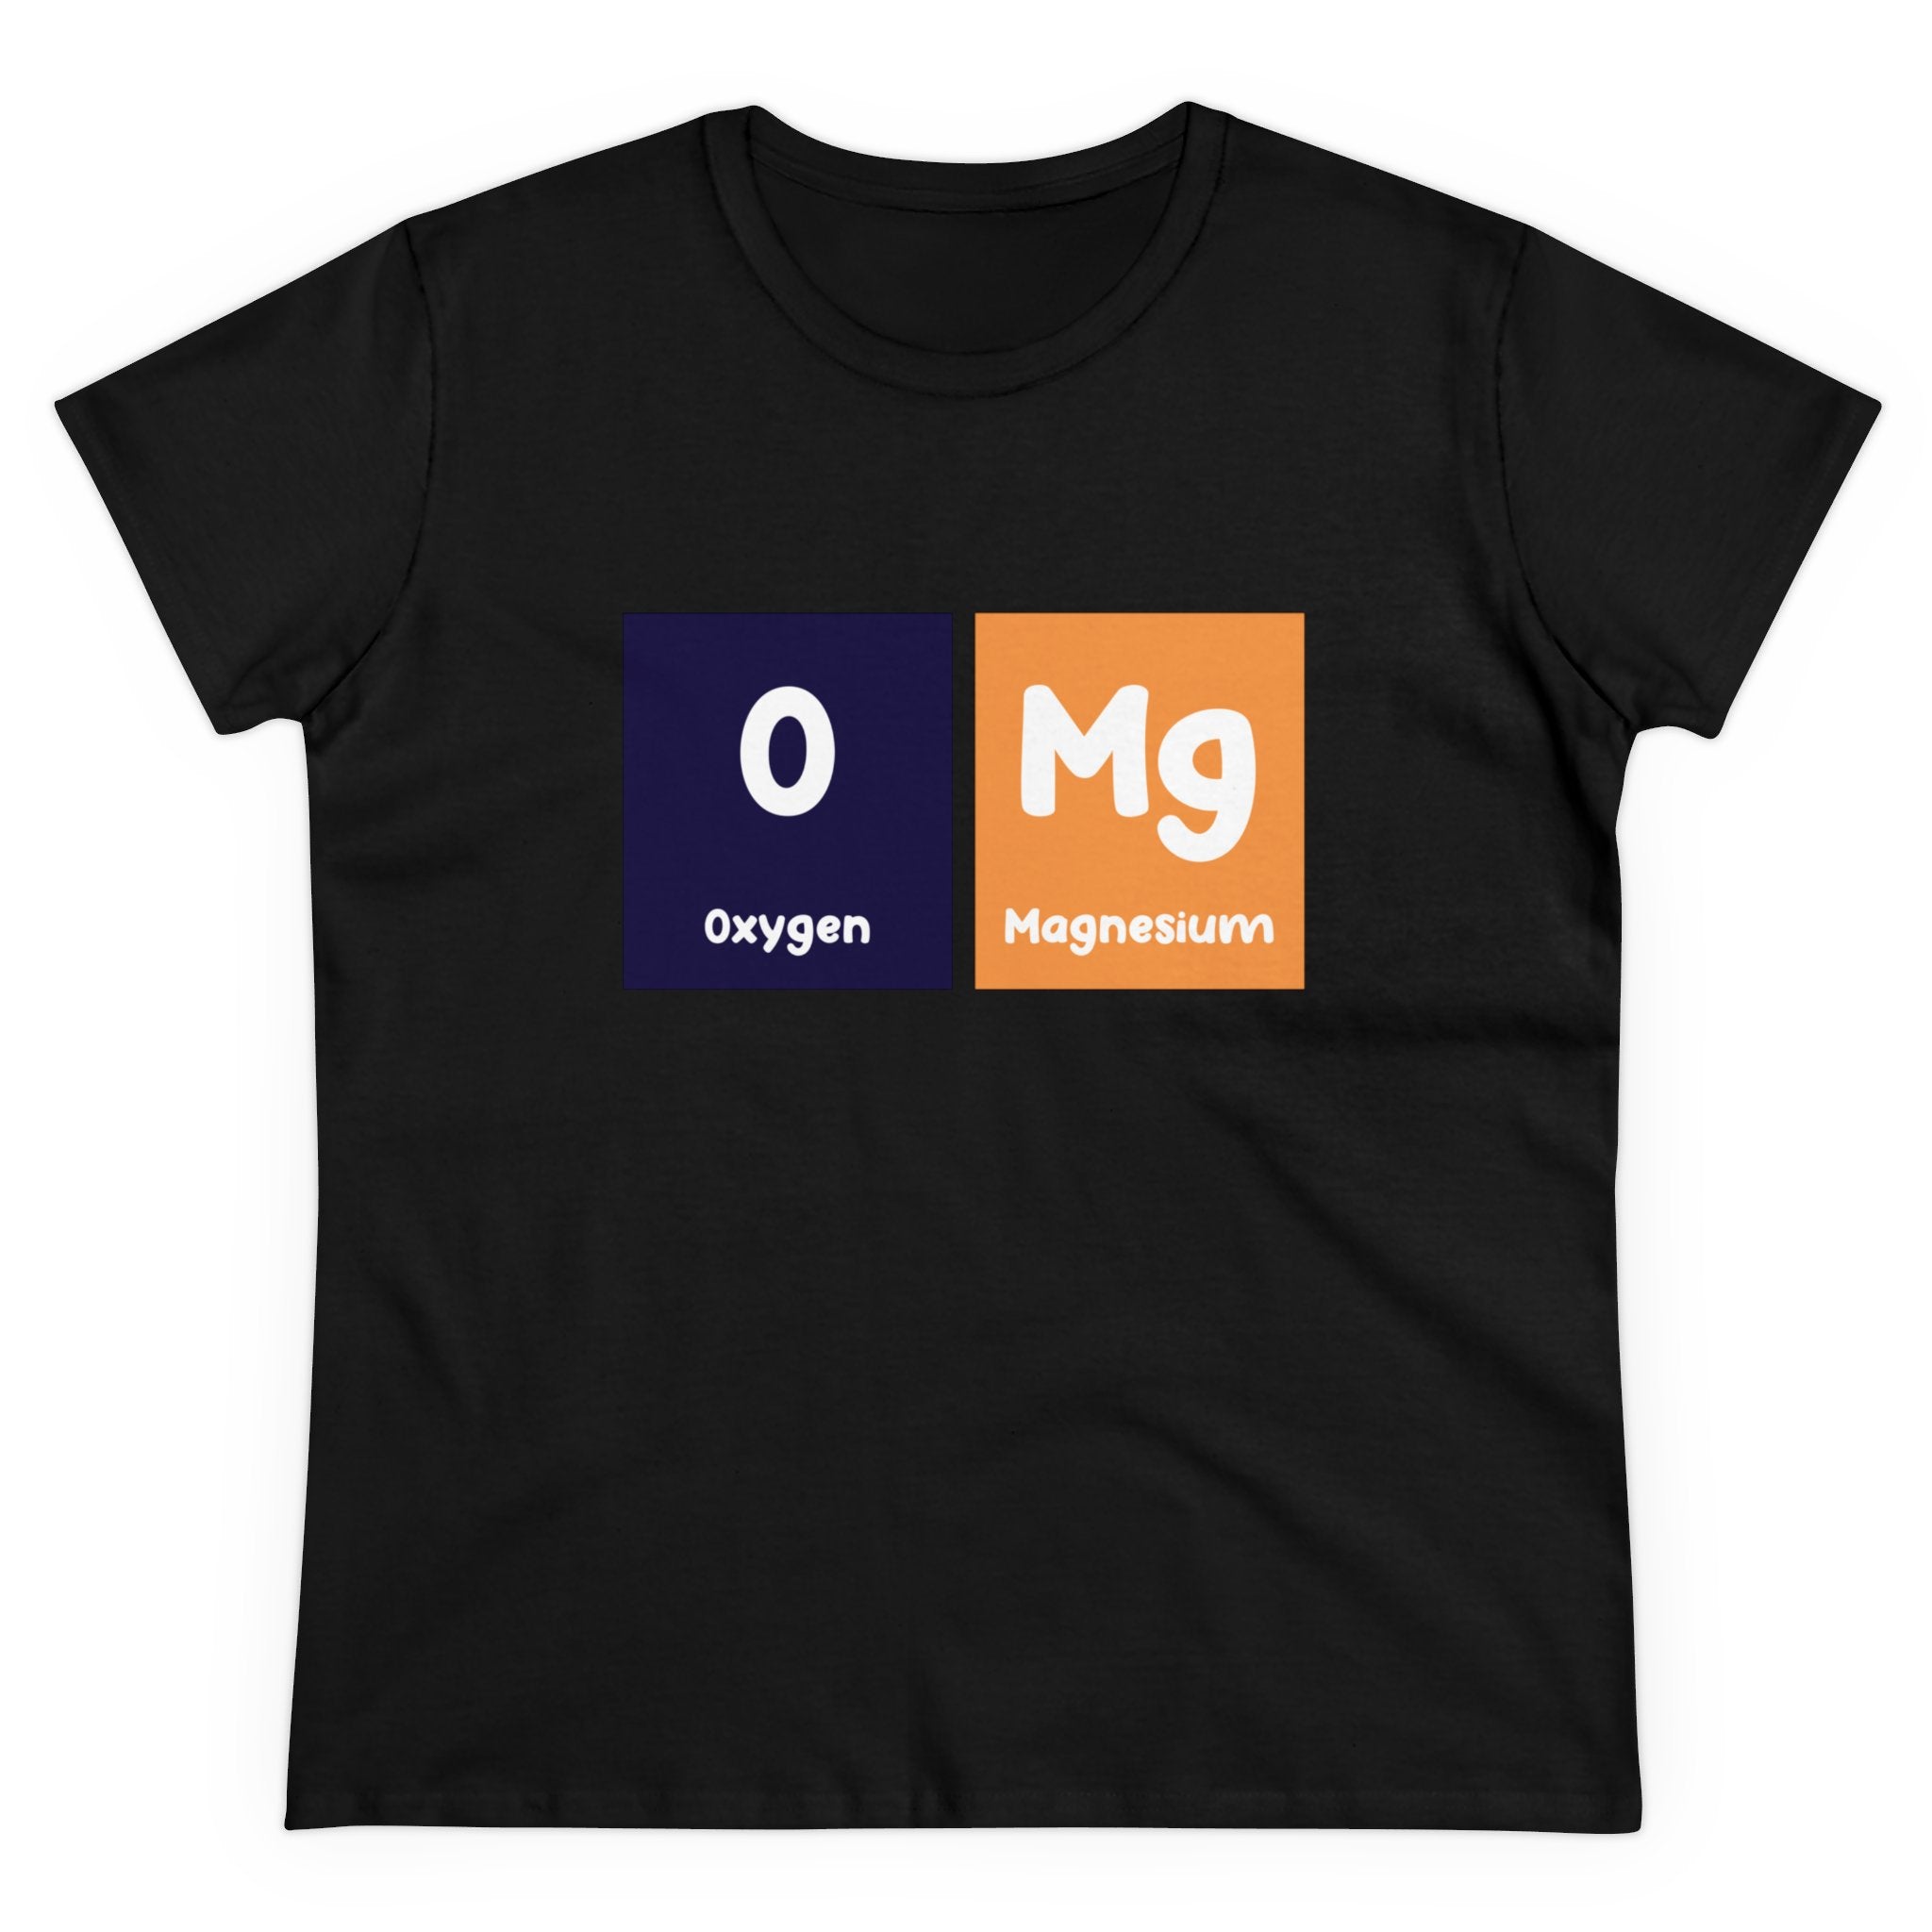 O-Mg - Women's Tee displaying the chemical symbols for Oxygen (O) and Magnesium (Mg), with their respective names underneath each symbol. This eco-friendly tee combines style and science seamlessly.